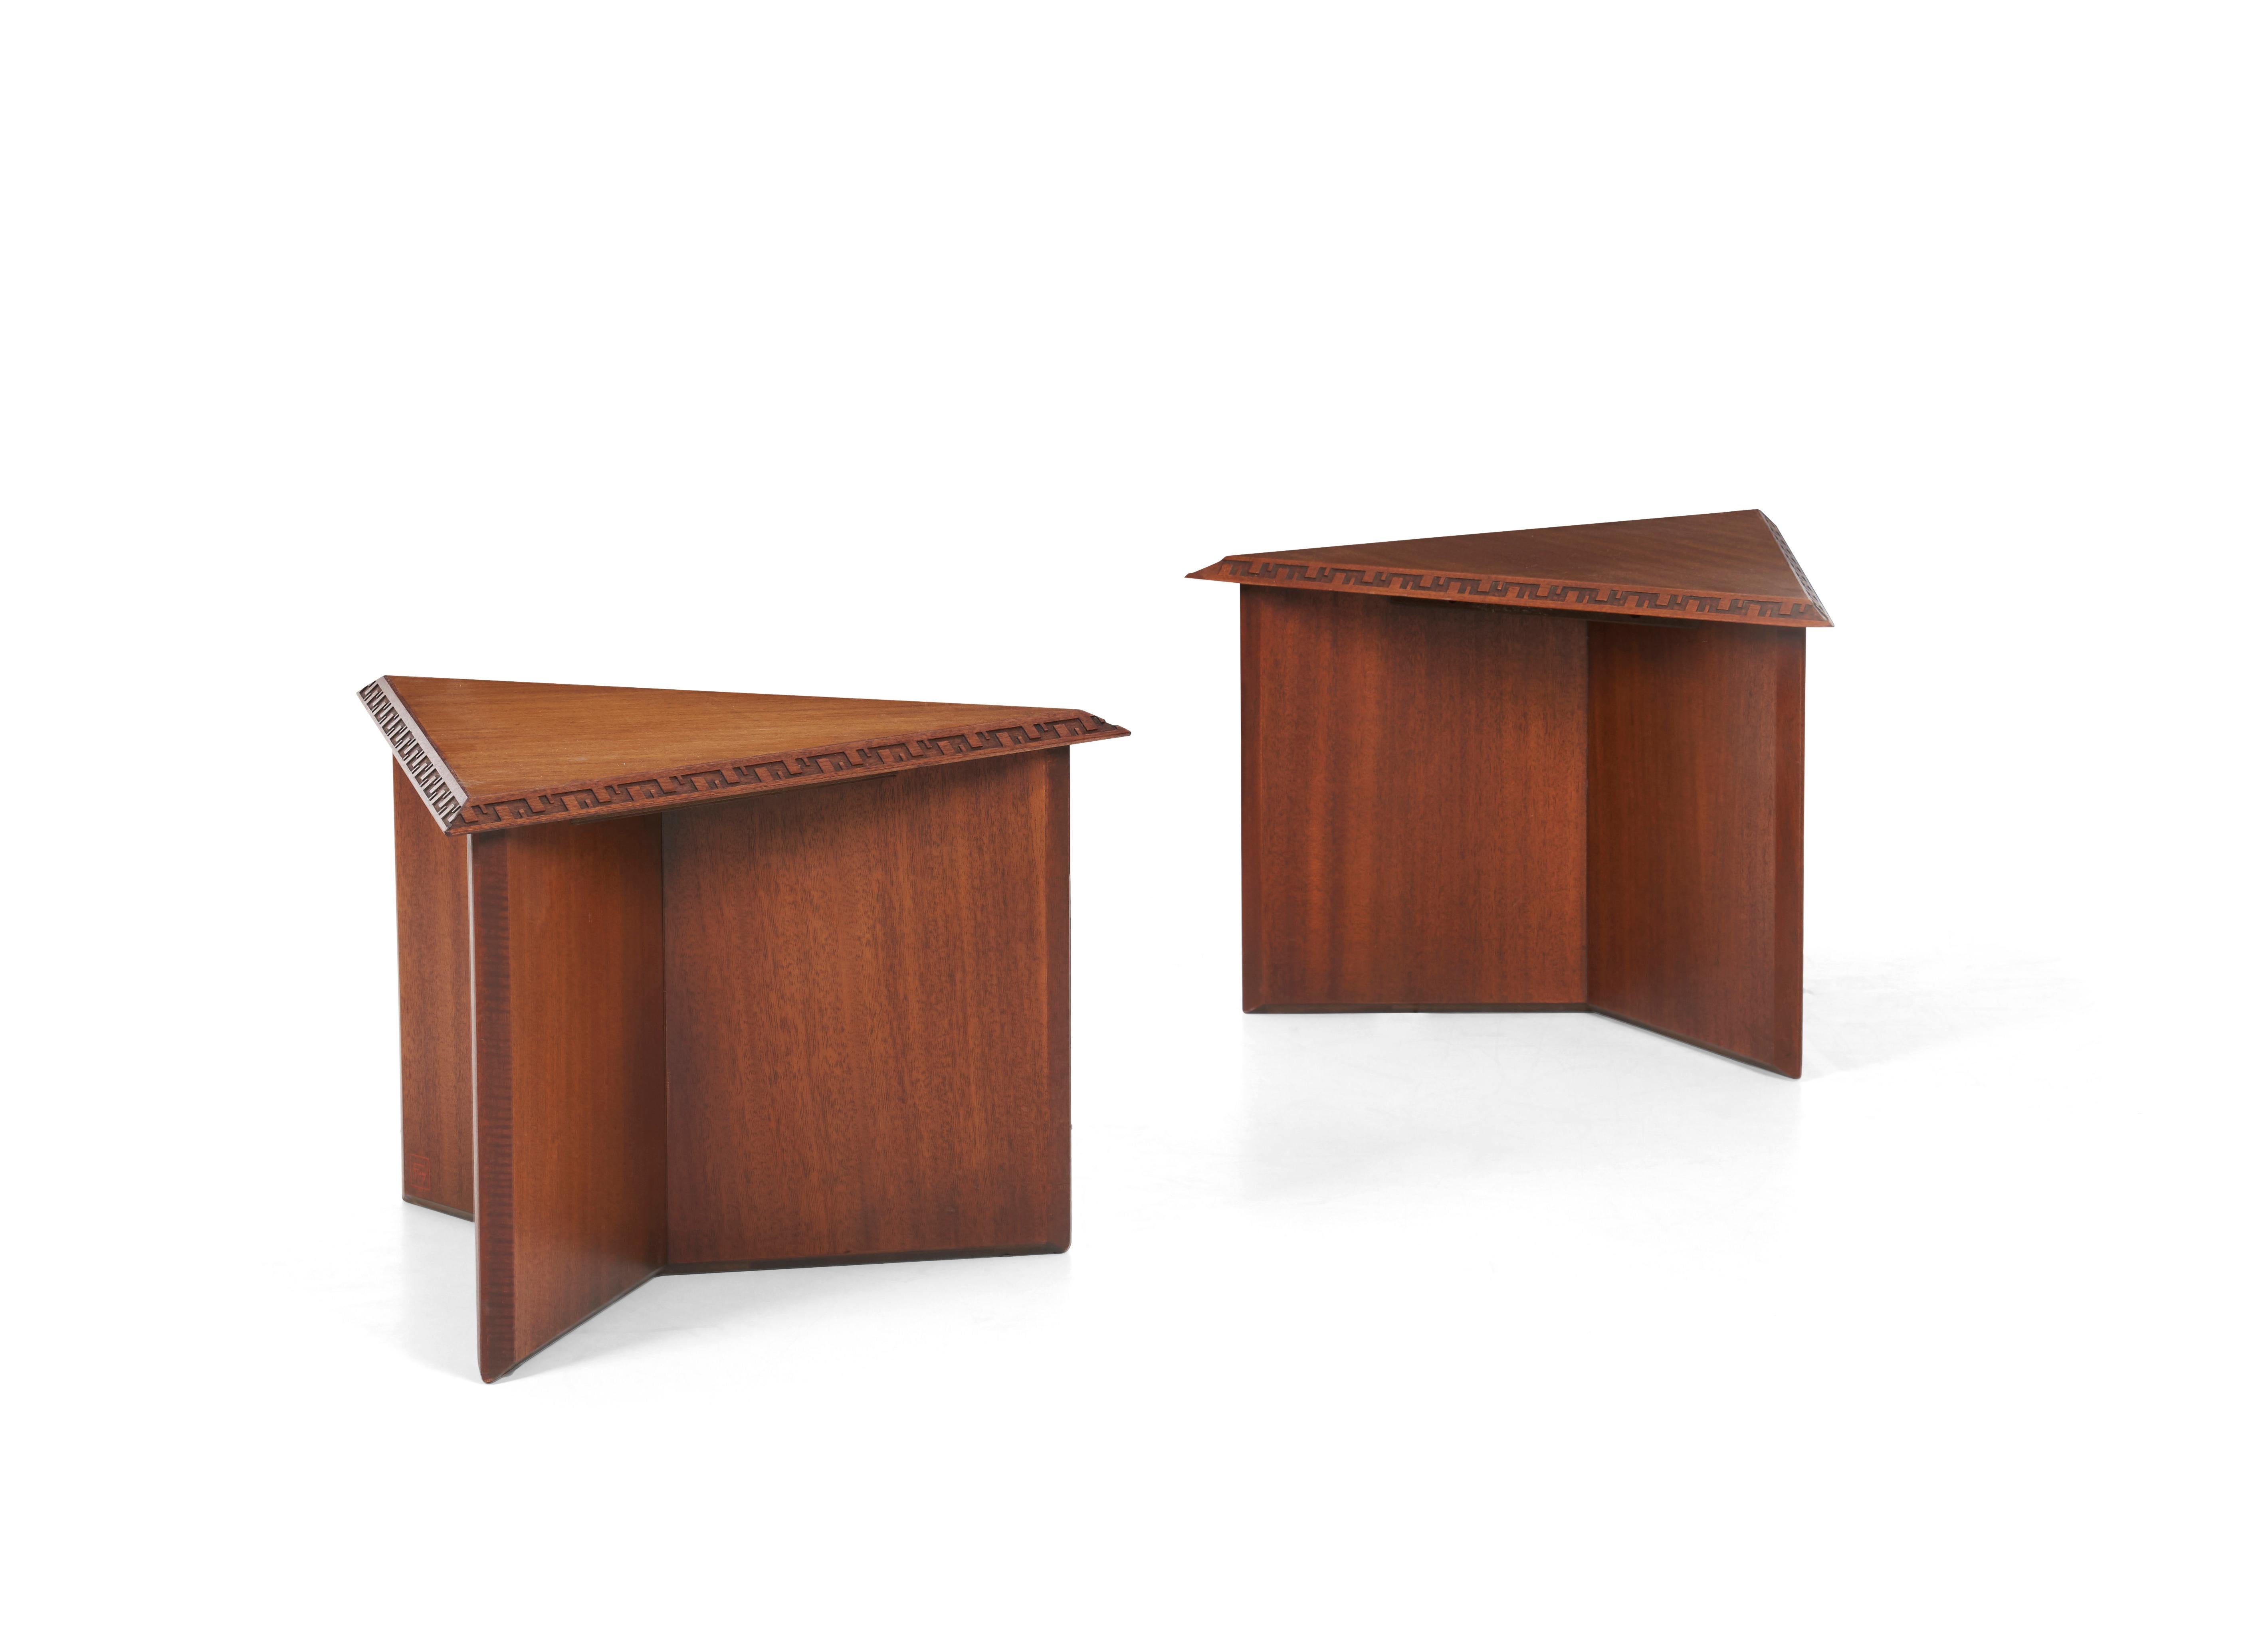 Frank Lloyd Wright pair of end tables, mahogany veneer with solid mahogany carved design detailed edge, oil finish.
(stamped FLW red square on lower leg).